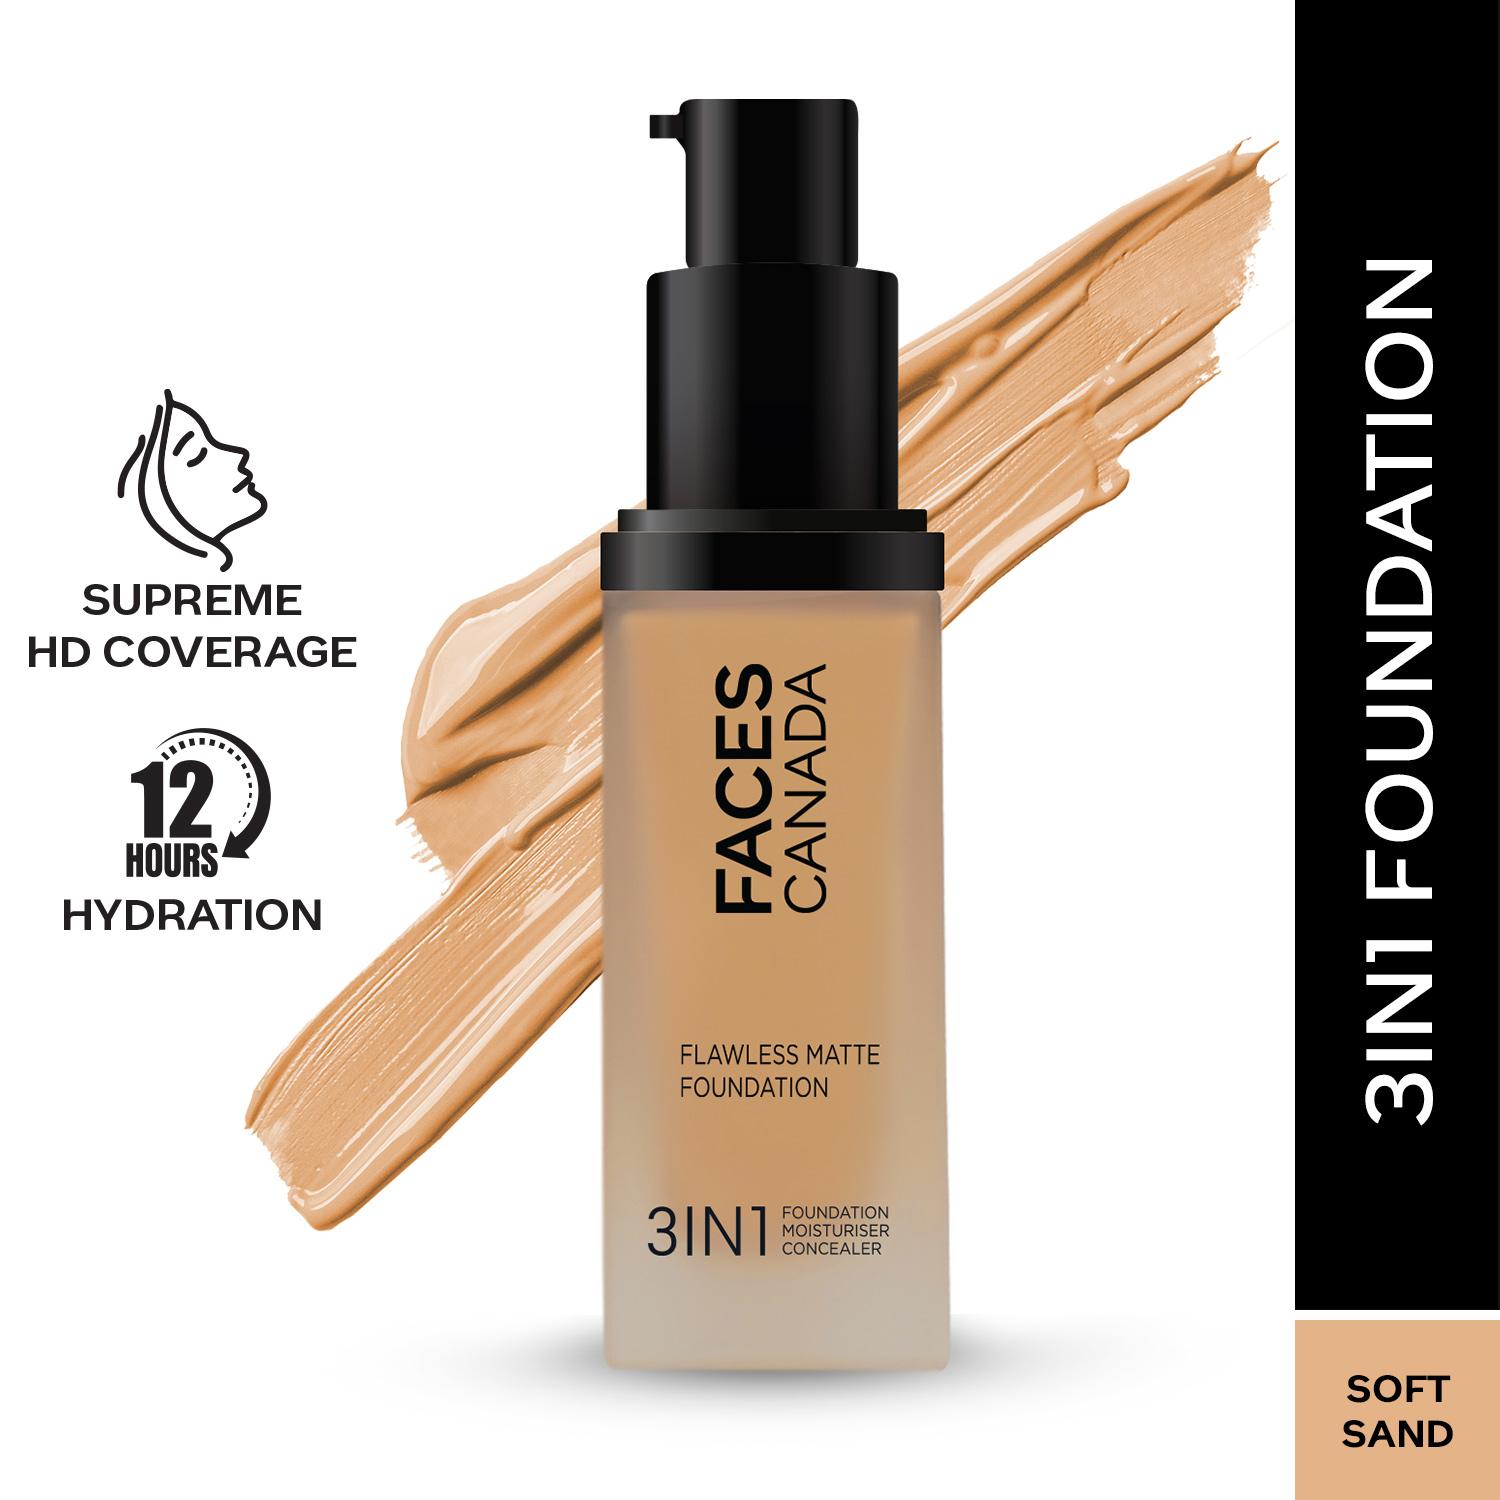 Faces Canada | Faces Canada 3-In-1 Flawless Matte Foundation SPF 18 - 041 Soft Sand (30ml)